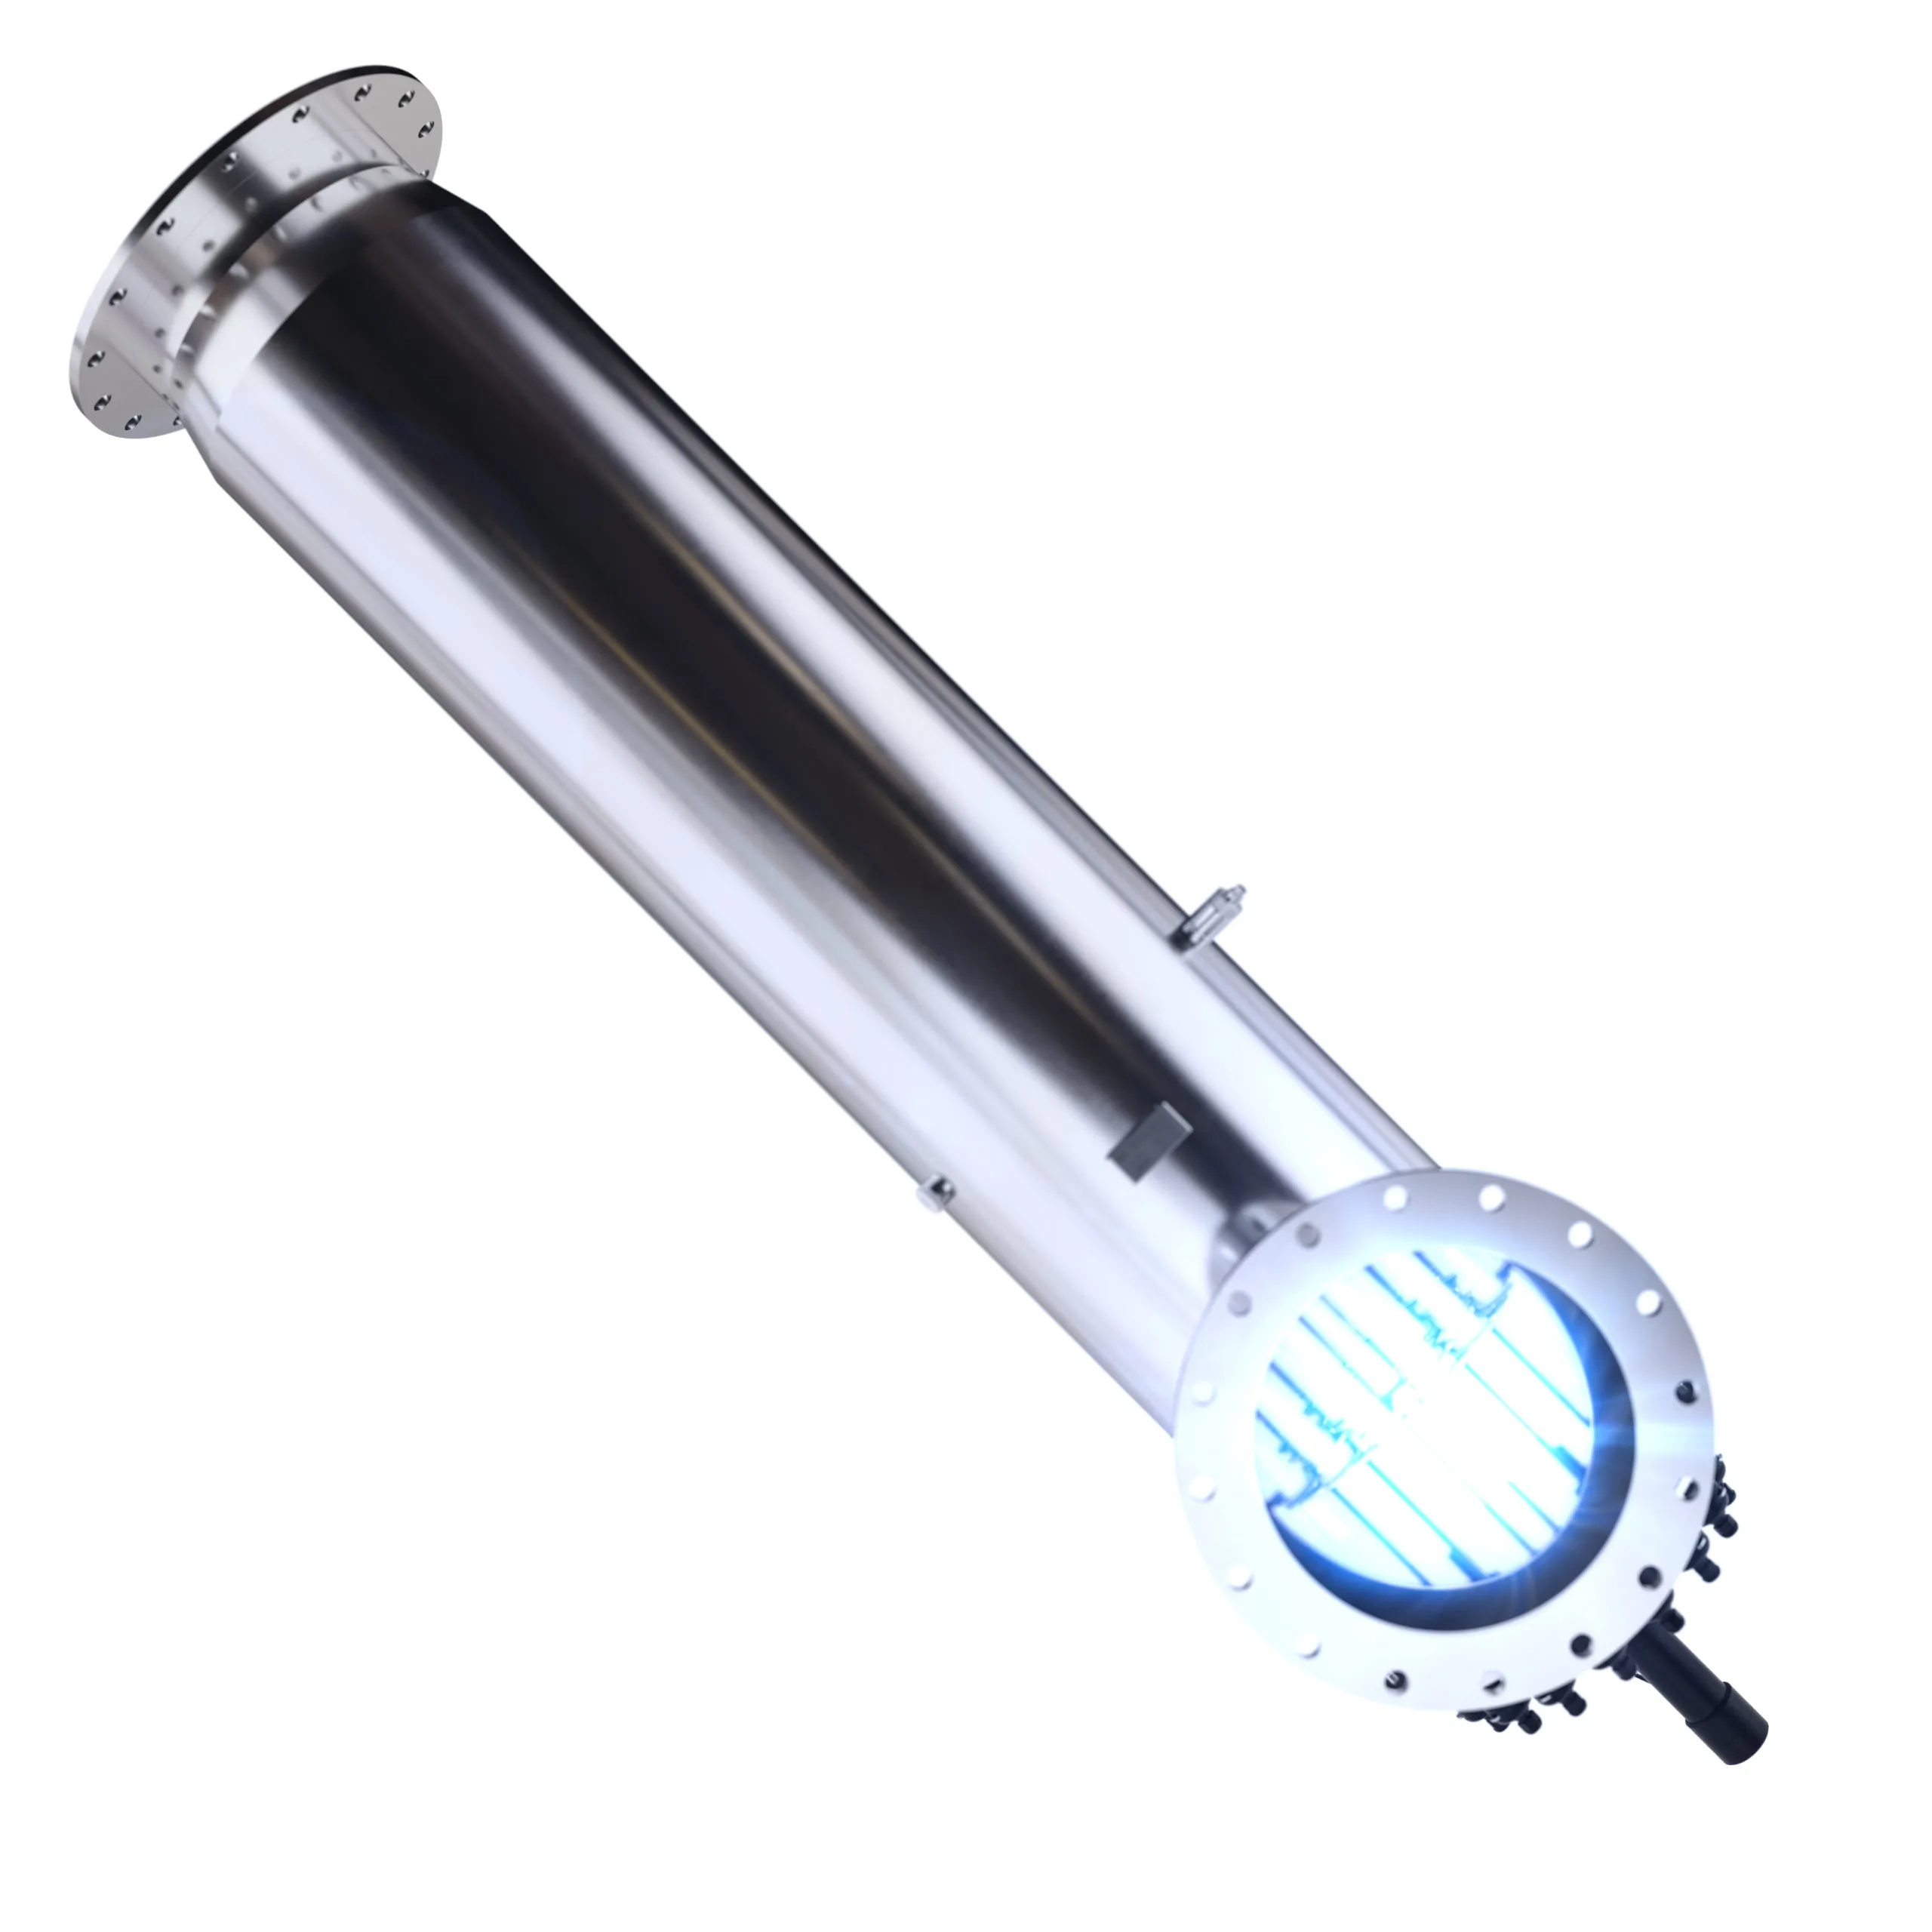 luvt series uv disinfection system